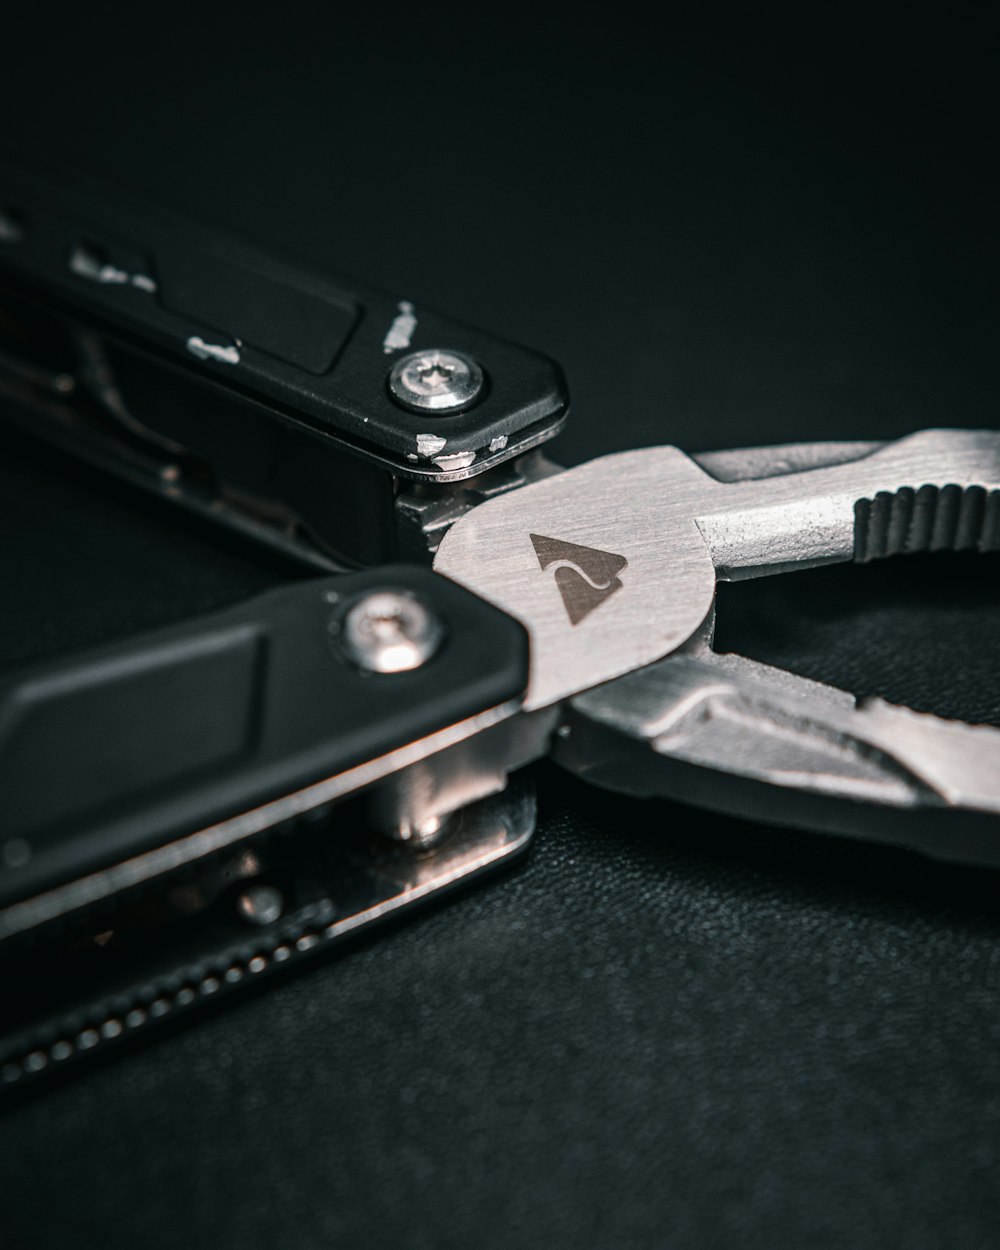 a pair of pliers are open on a black surface